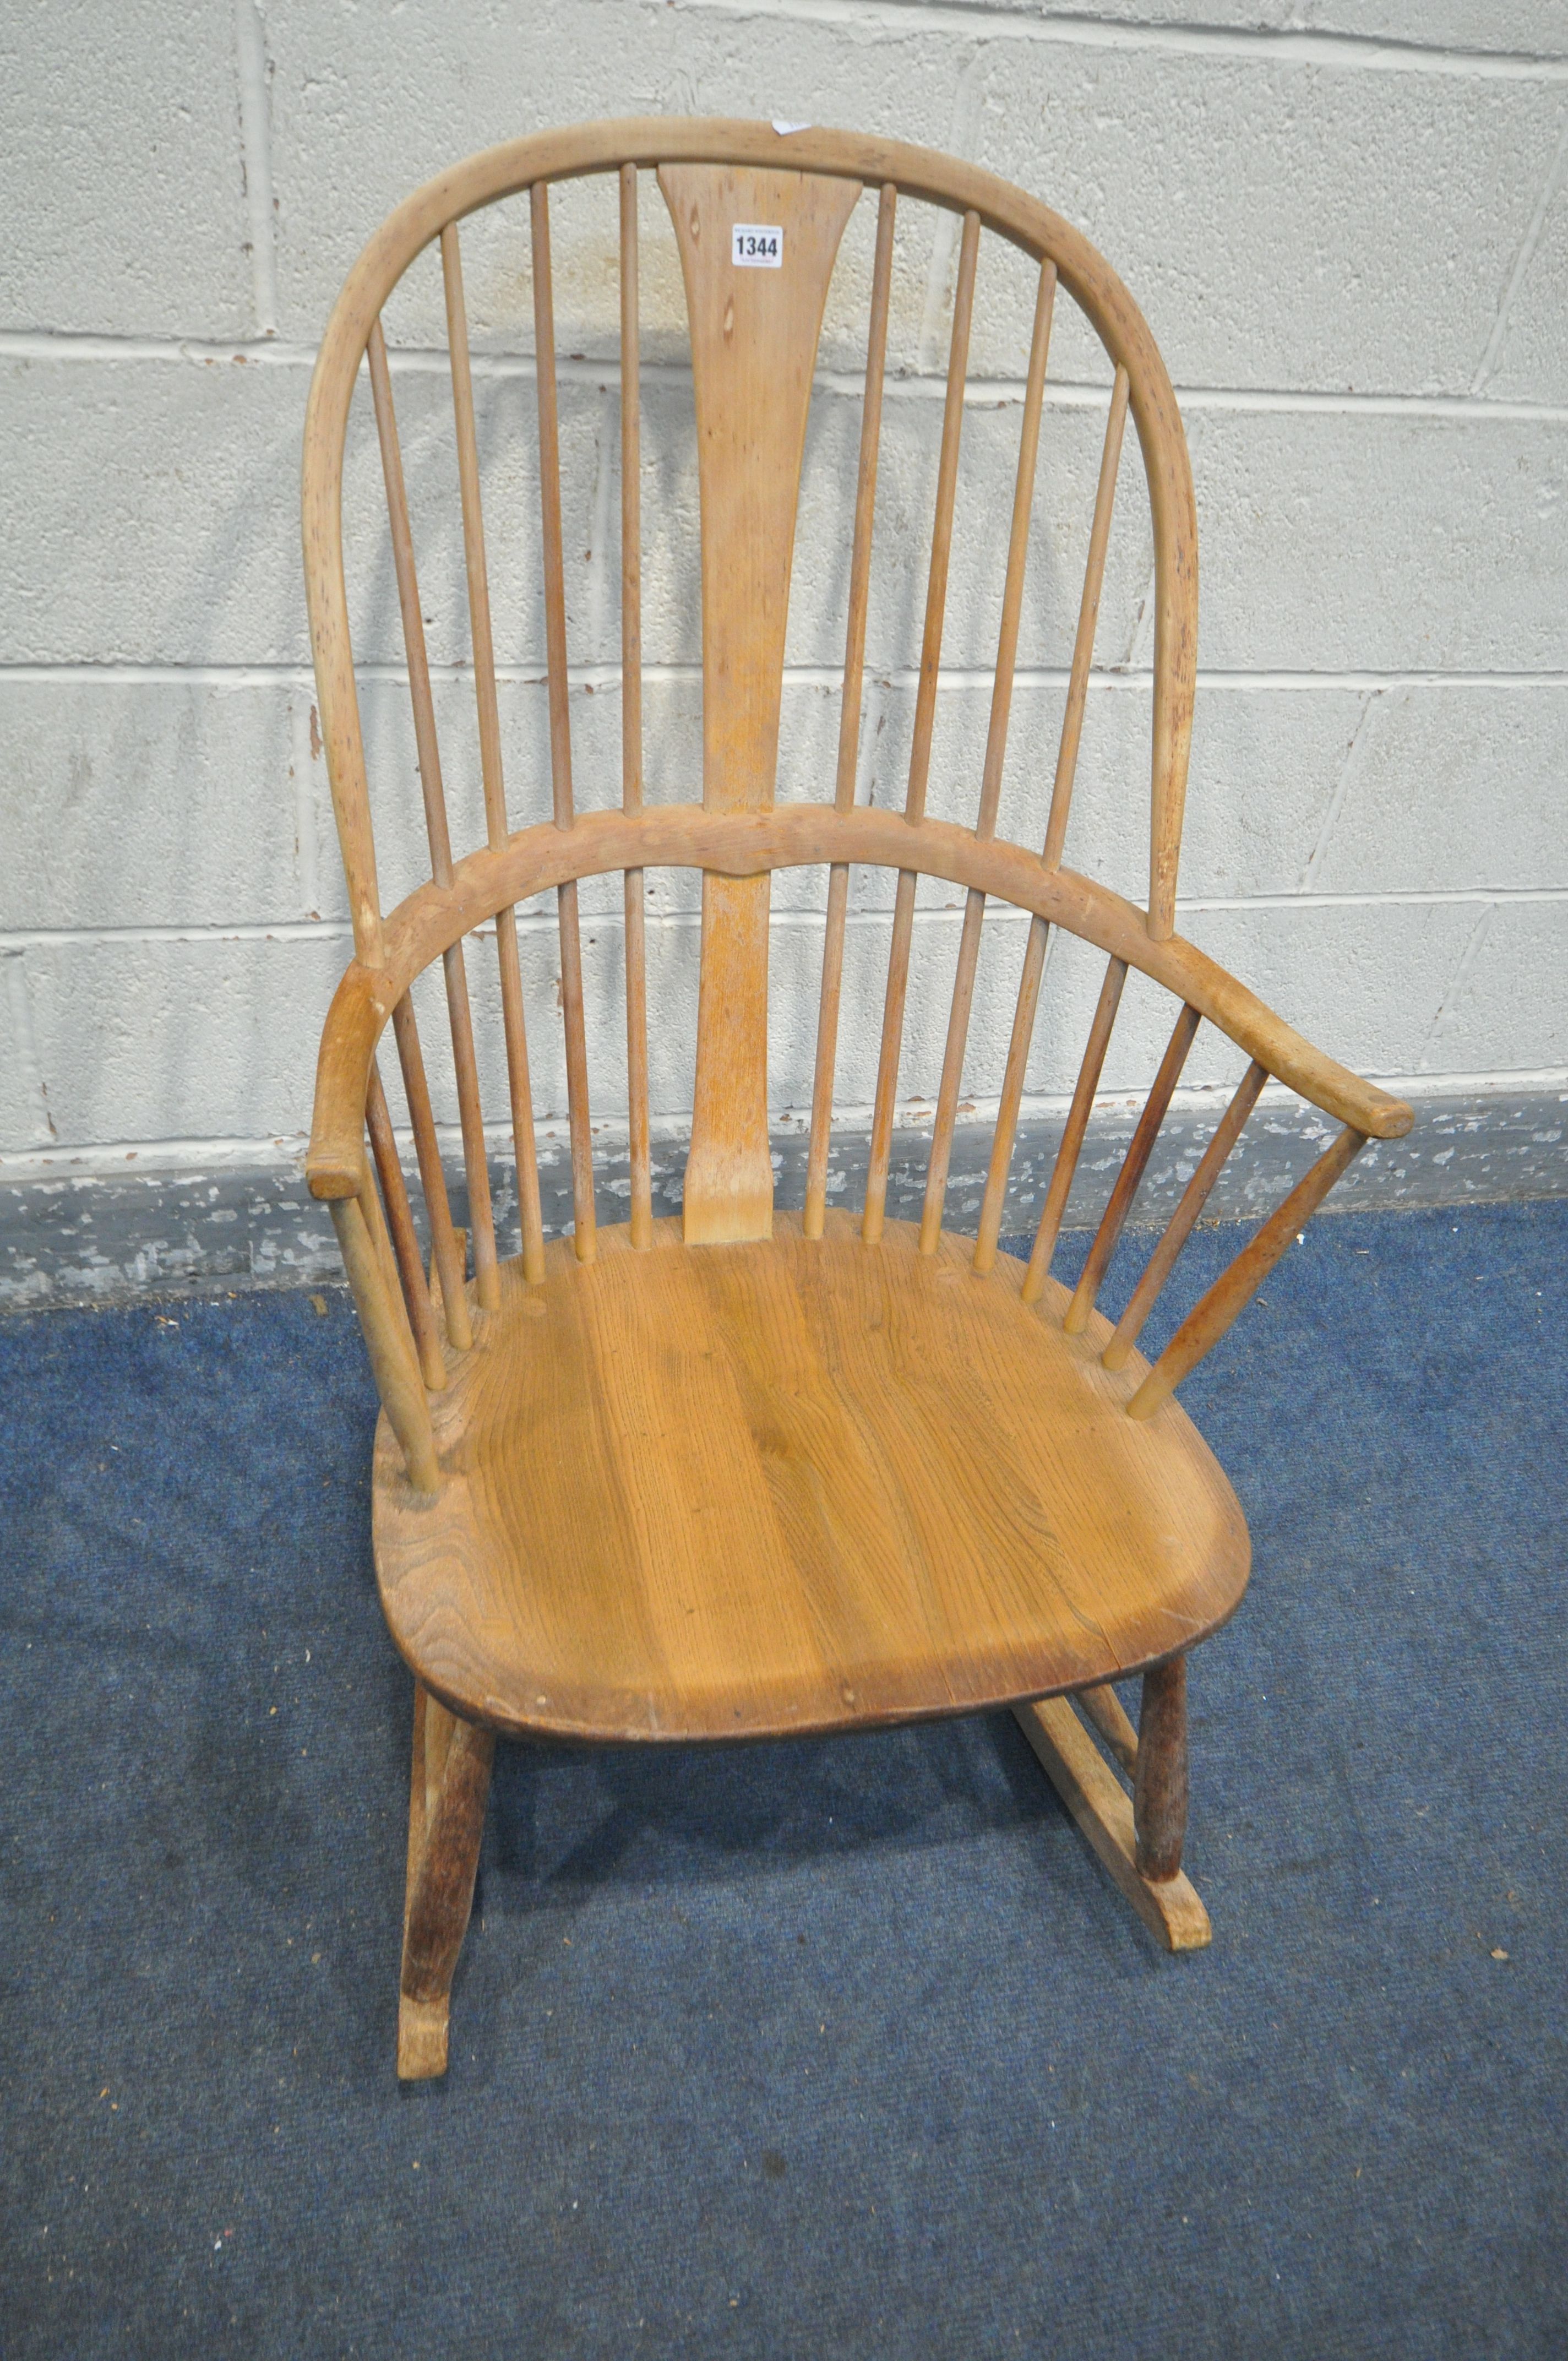 AN ERCOL ELM AND BEECH ROCKING CHAIR (condition - ideal for restoration due to discolouration, water